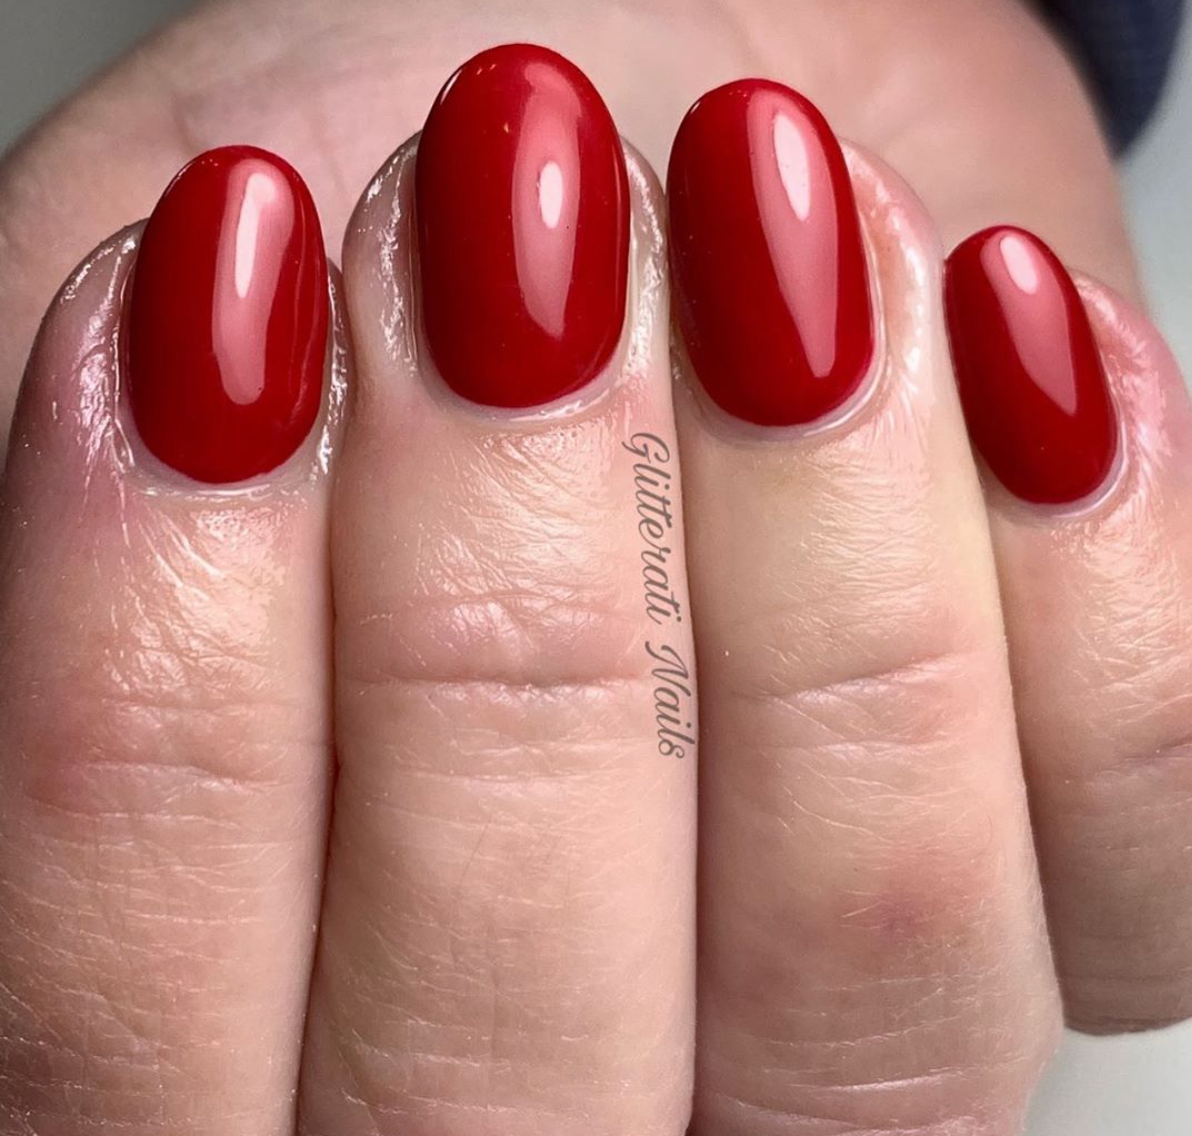 Bloody Mary Gel Color